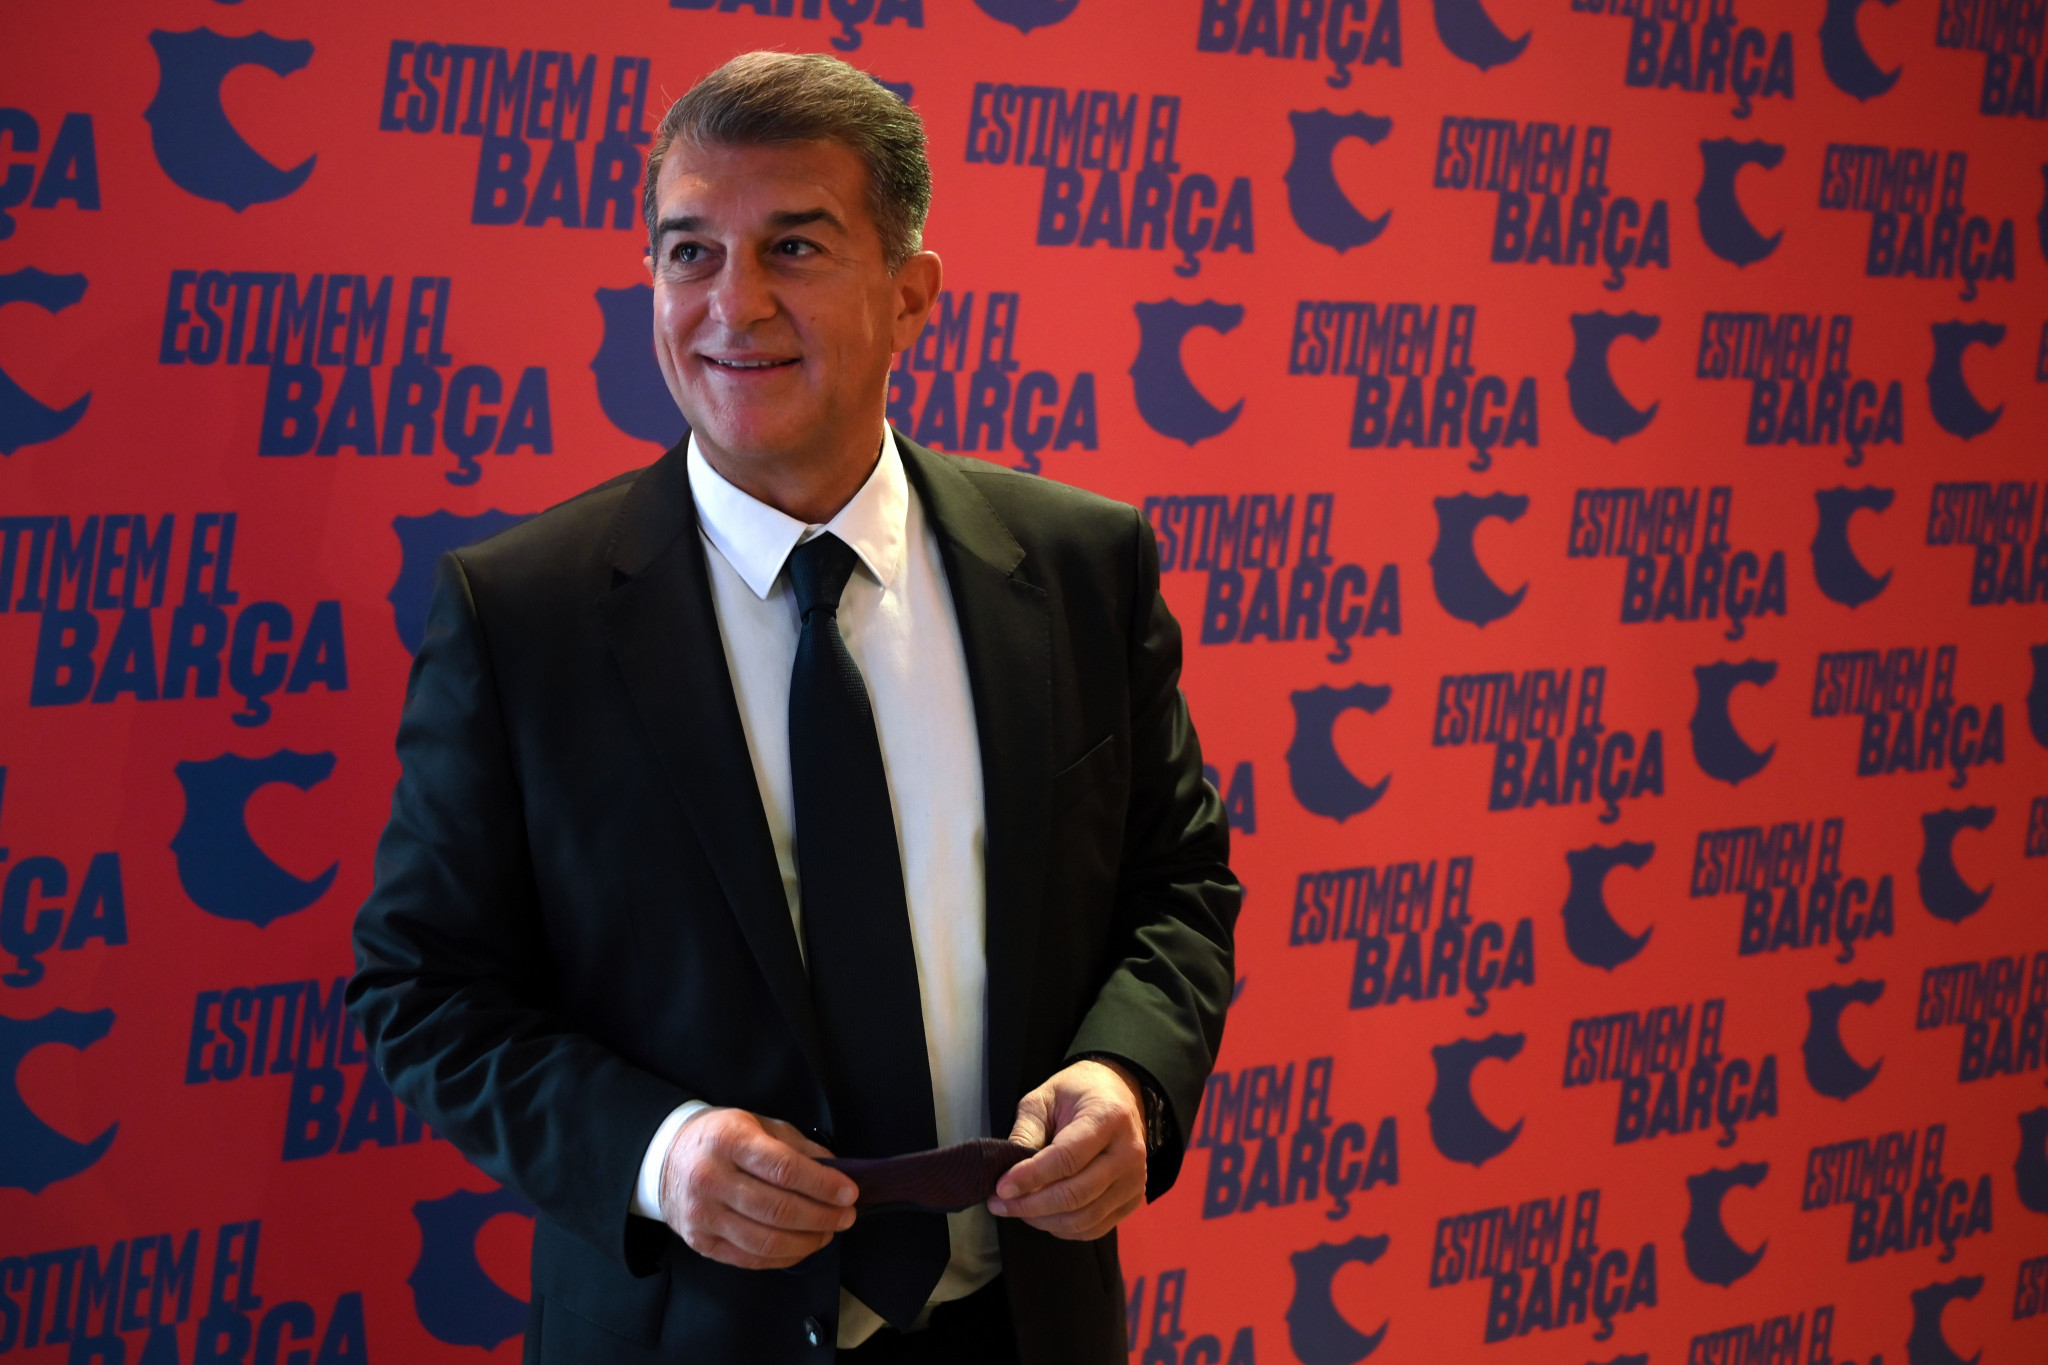 Joan Laporta, in his second spell as President of FC Barcelona, has denied that the club ever bribed Spanish referees ©Getty Images